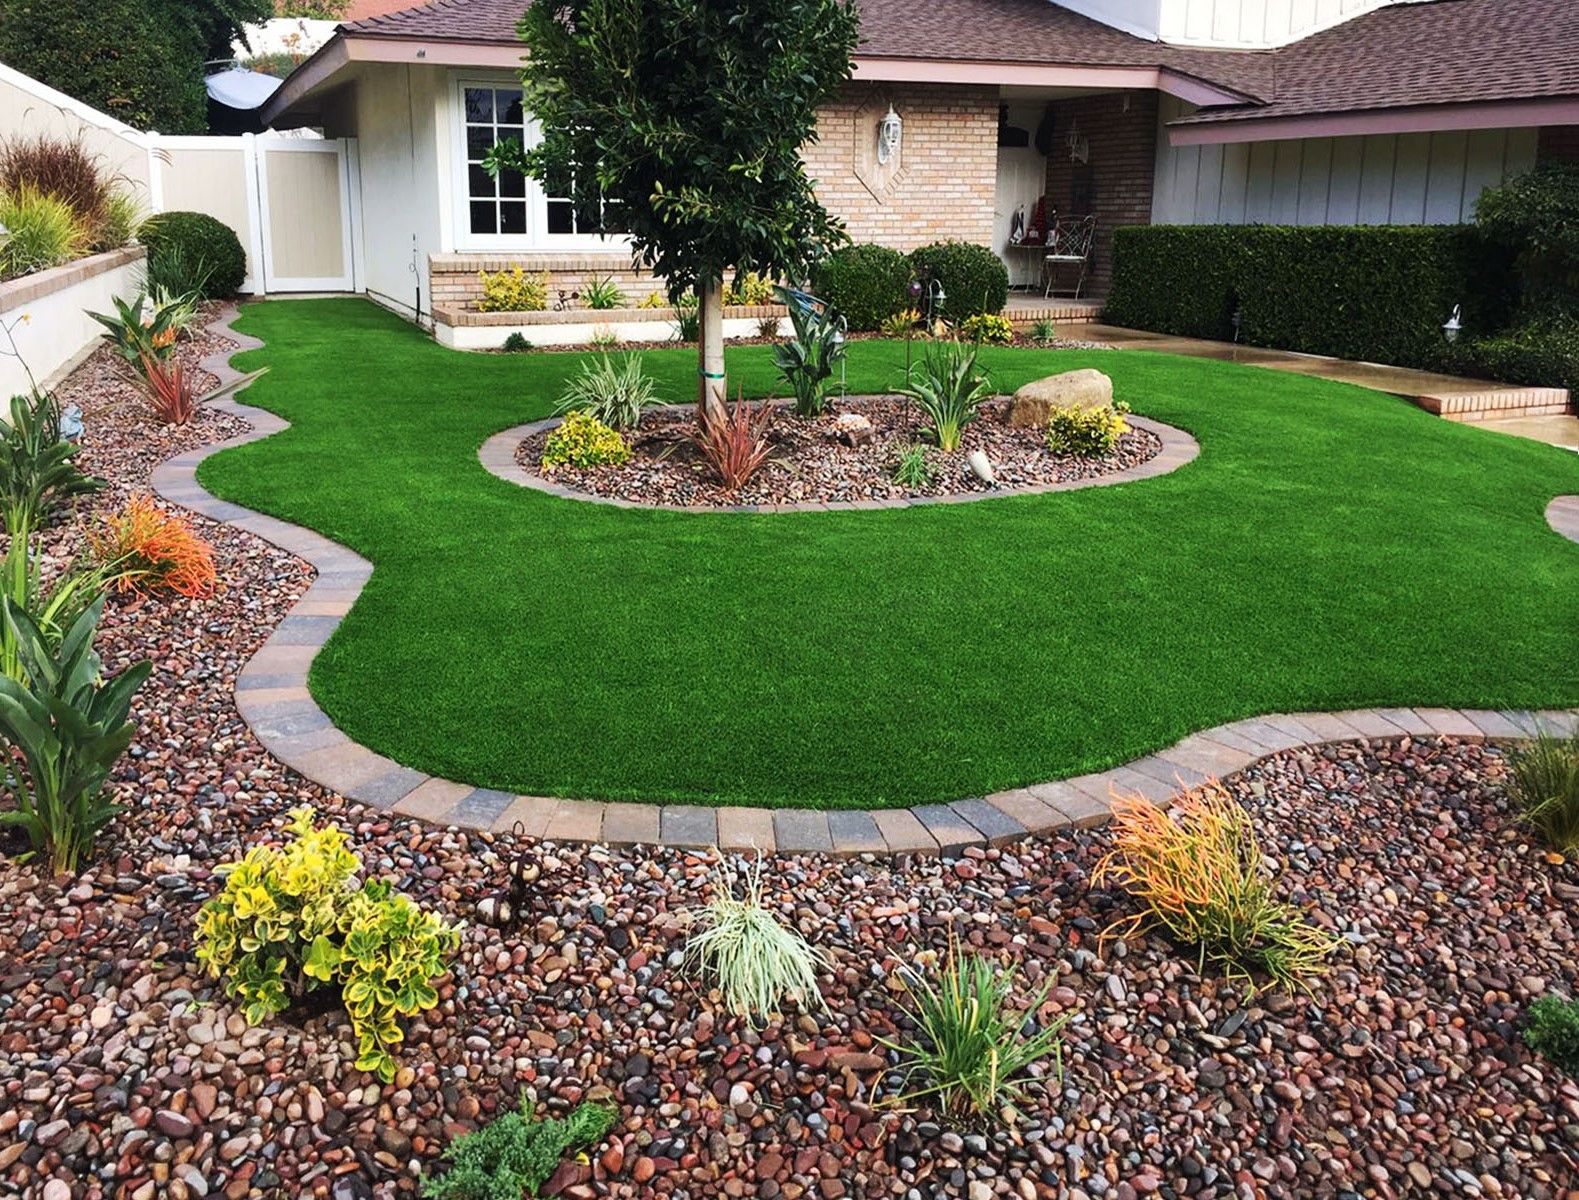 beautifully manicured lawn with lush green grass